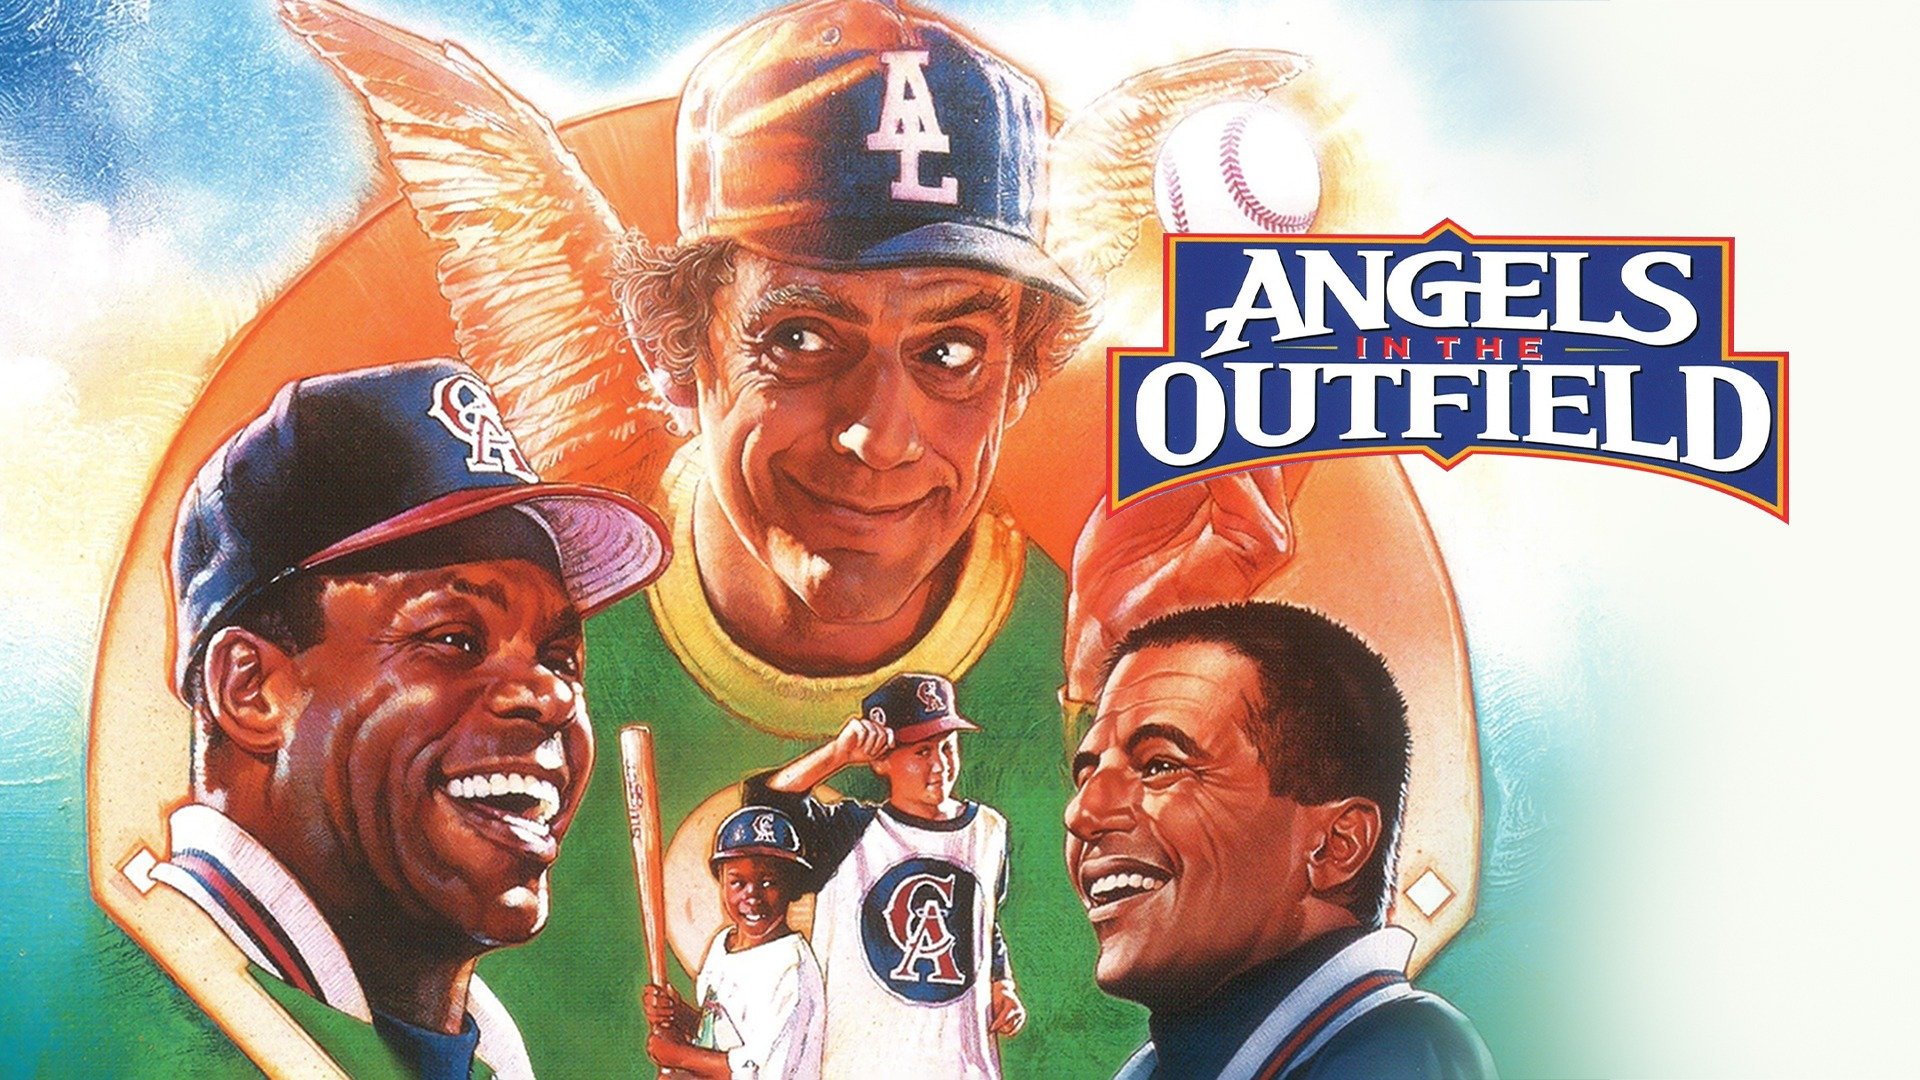 angels in the outfield cast